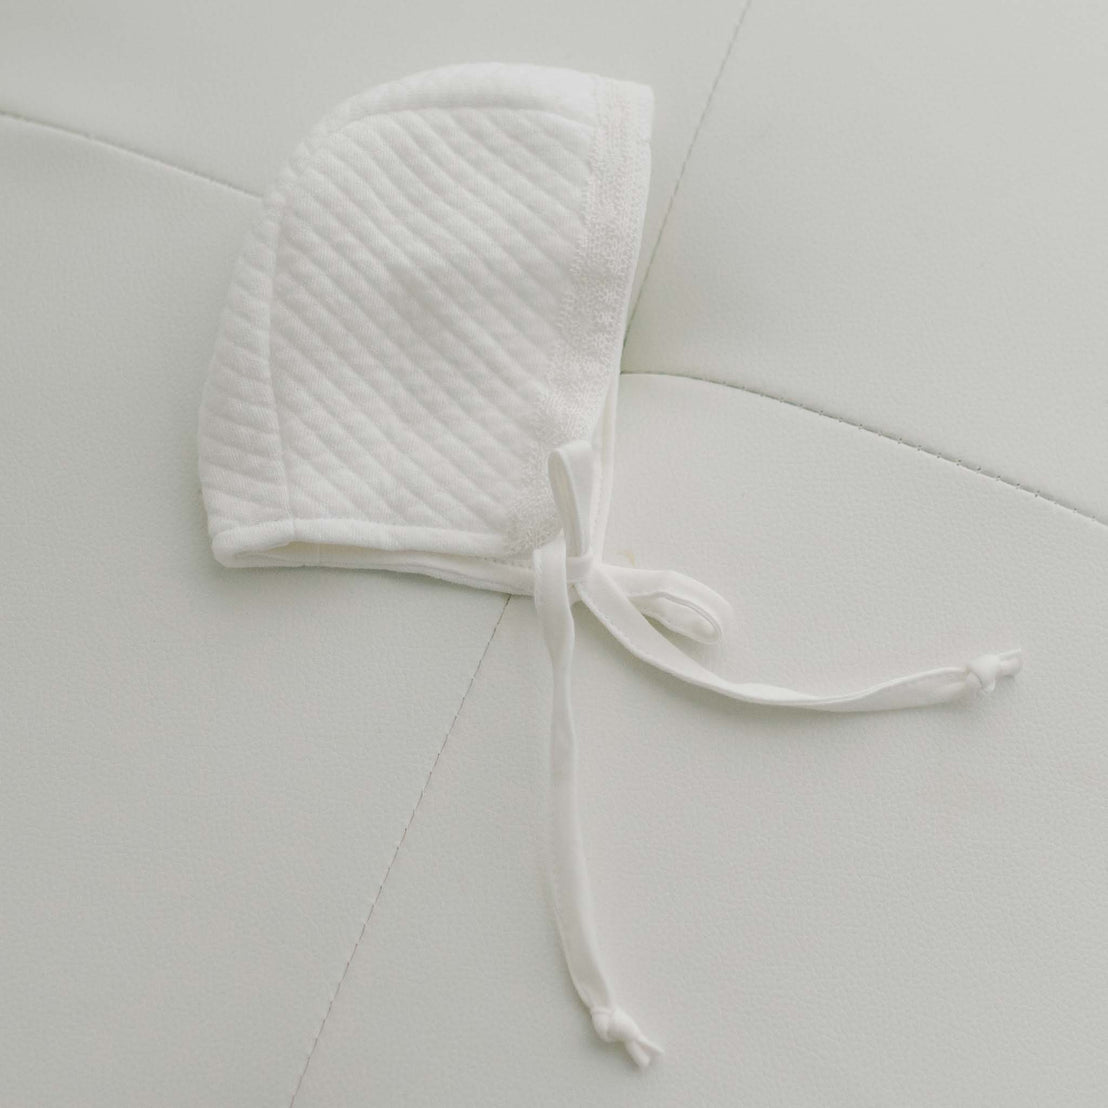 Side of ivory cotton baby bonnet